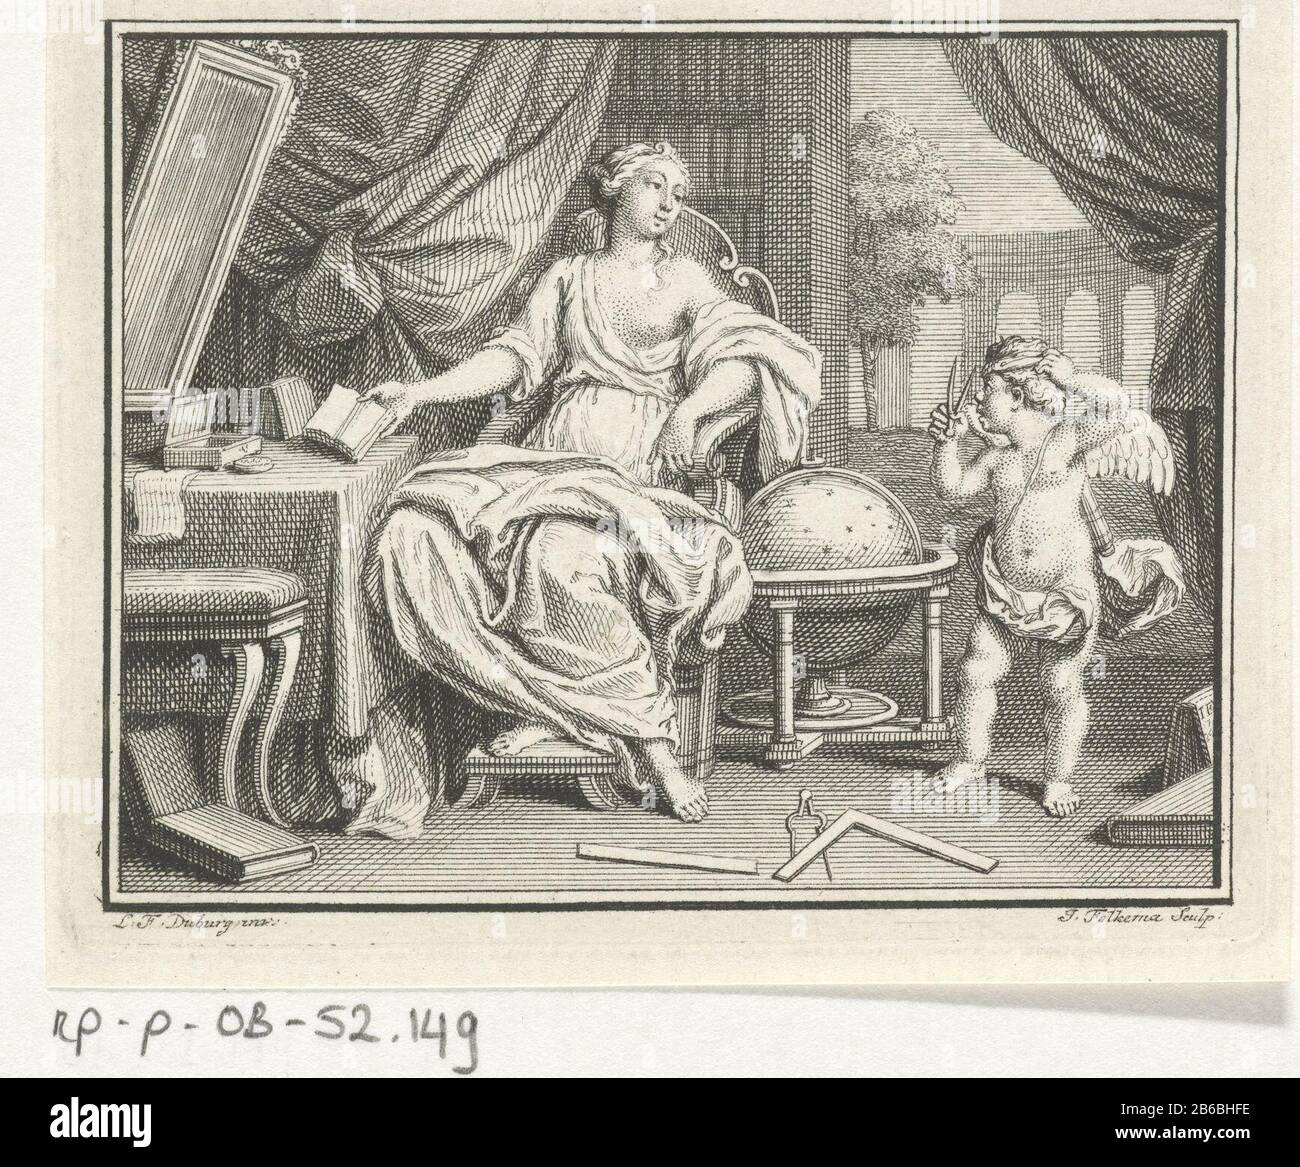 Astronomy in a room The personification of Astronomy, one of the Seven Liberal Arts, is in a lea behind a table Where: books lie. Next to her is a globe on the floor measuring instruments and books. Astronomy is accompanied by a putto with a compass speelt. Manufacturer : printmaker Jacob Folkema (listed building), designed by Louis Fabritius Dubourg (listed building) Dated: 1703 - 1767 Physical features: etching material: paper Technique: etching Dimensions: plate edge : h 67 mm × 84 b mm Subject: 'Astronomia', 'Cosmografia'; 'Cosmografia '(Ripa) cupids' Amores ',' amoretti '' putti' Stock Photo